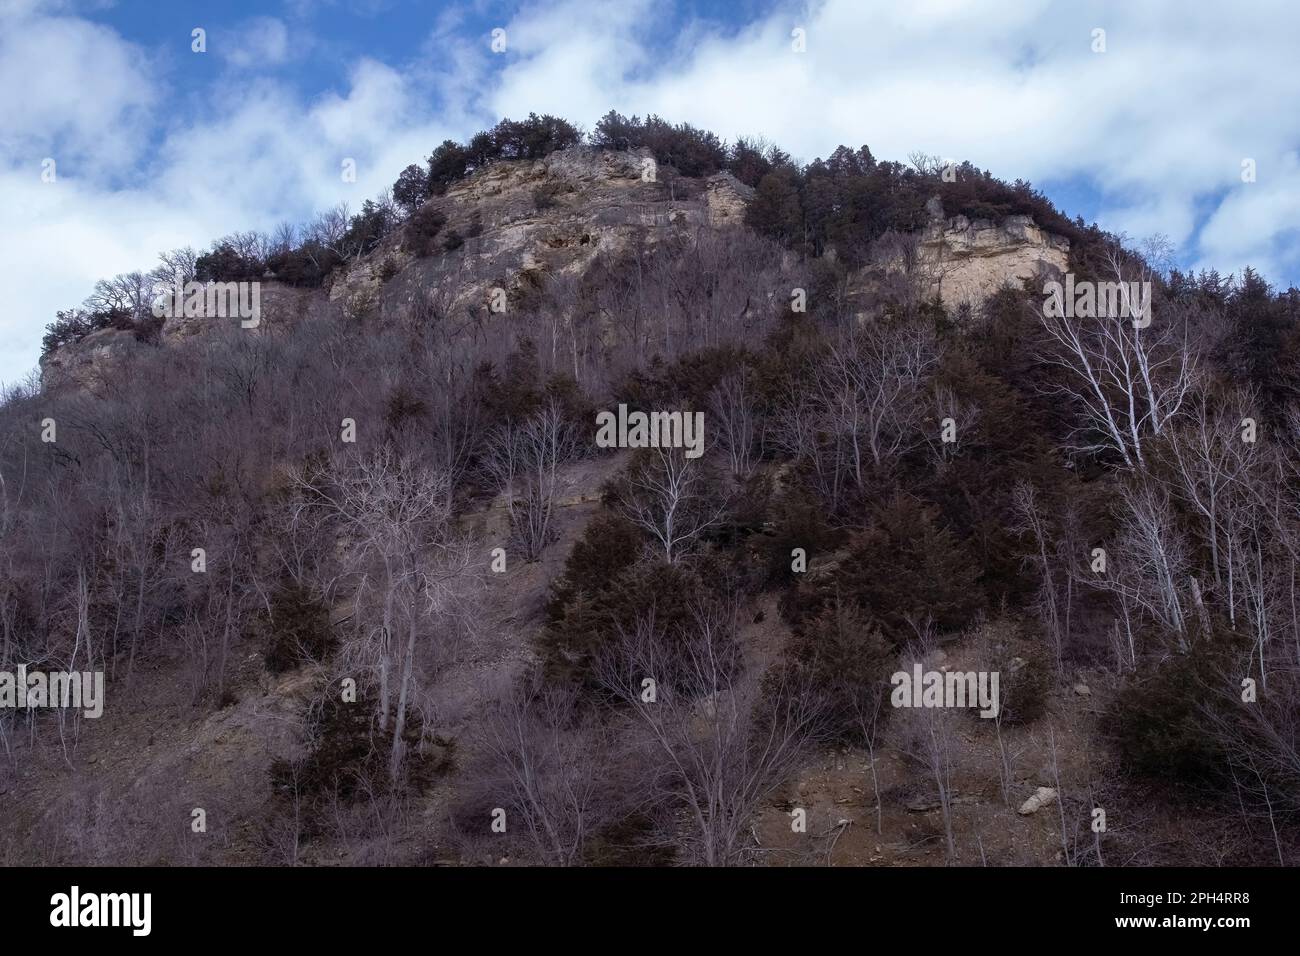 Tall bluff with rock and trees at the overlook across from Lake Pepin in Maiden Rock, Wisconsin USA. Stock Photo